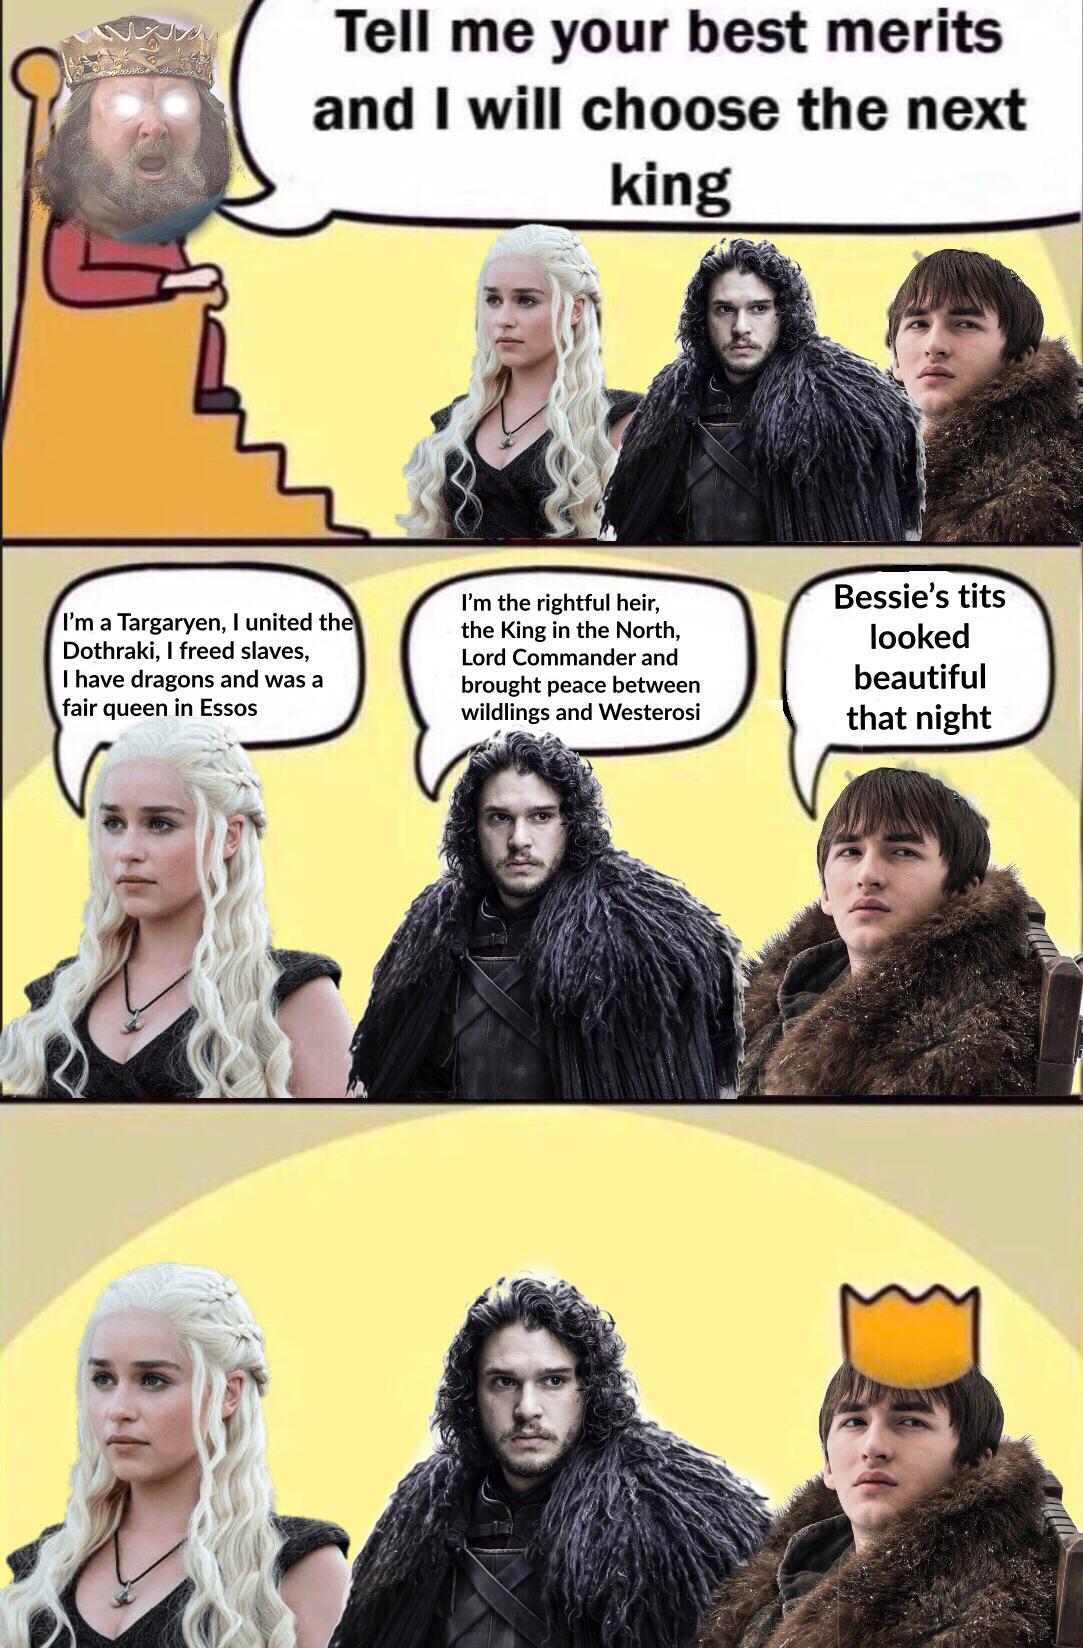 Robert-baratheon, Bran, Jon, Dany, Bessie, King Game of thrones memes Robert-baratheon, Bran, Jon, Dany, Bessie, King text: Tell me your best merits and I will choose the next I'm a Targaryen, I united th Dothraki, I freed slaves, I have dragons and was a fair queen in Essos king I'm the rightful heir, the King in the North, Lord Commander and brought peace between wildlings and Westerosi Bessie's tits looked beautiful that night 